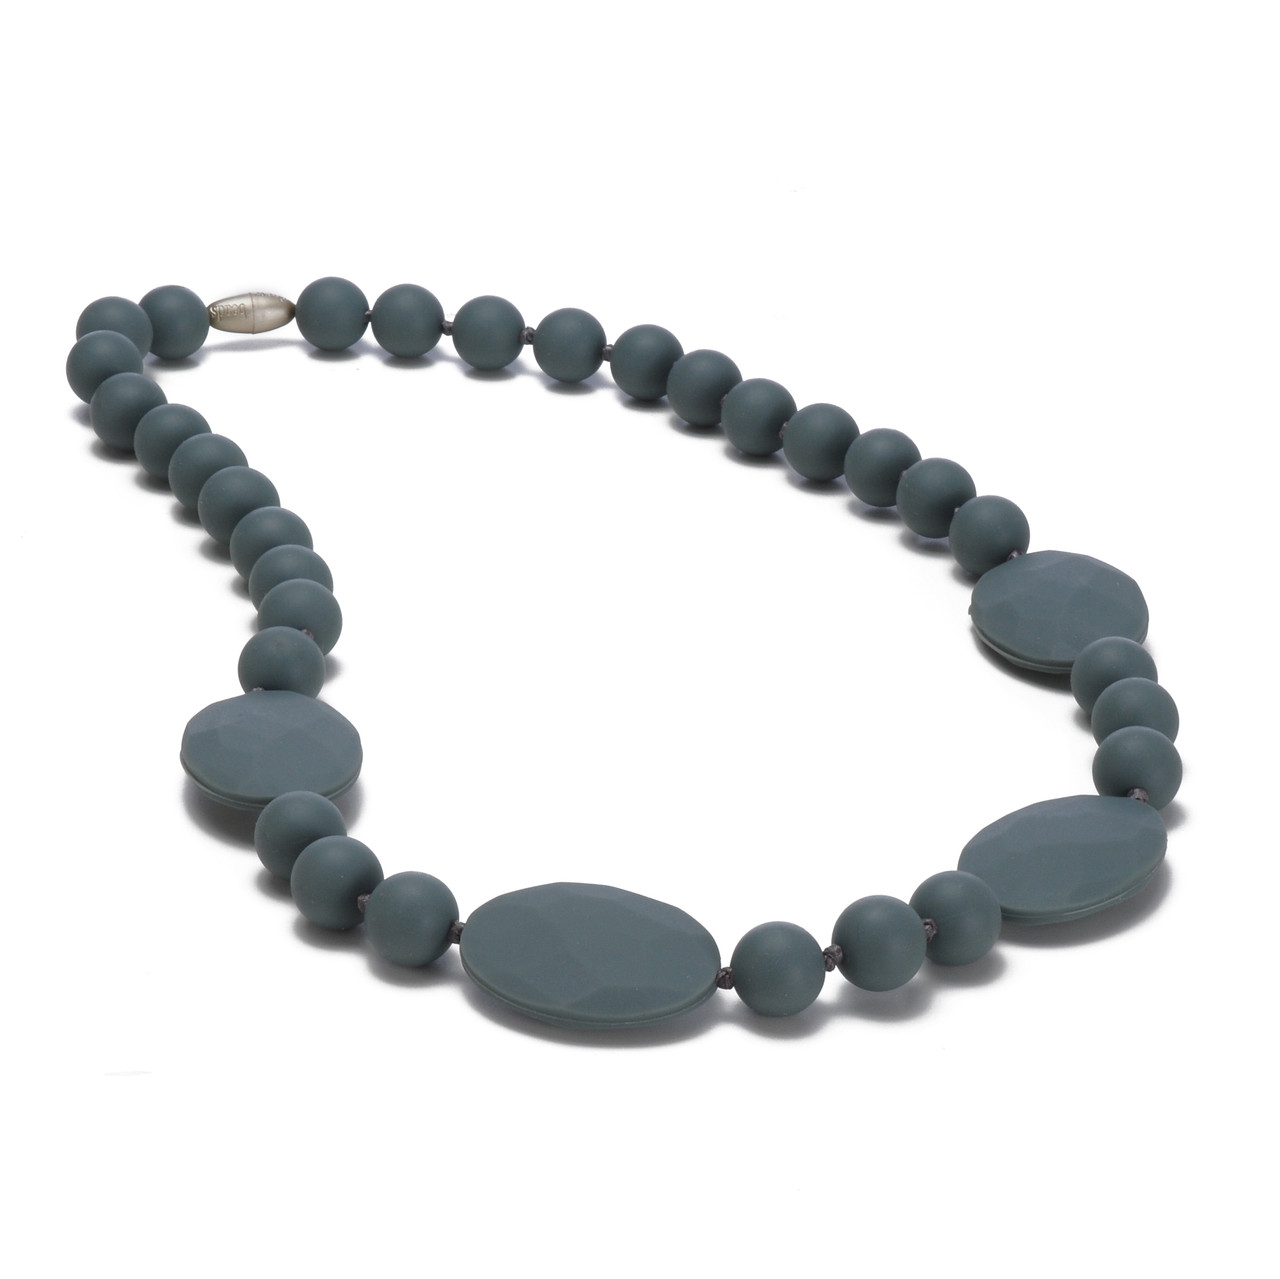 Stormy Grey Perry Teething Necklace